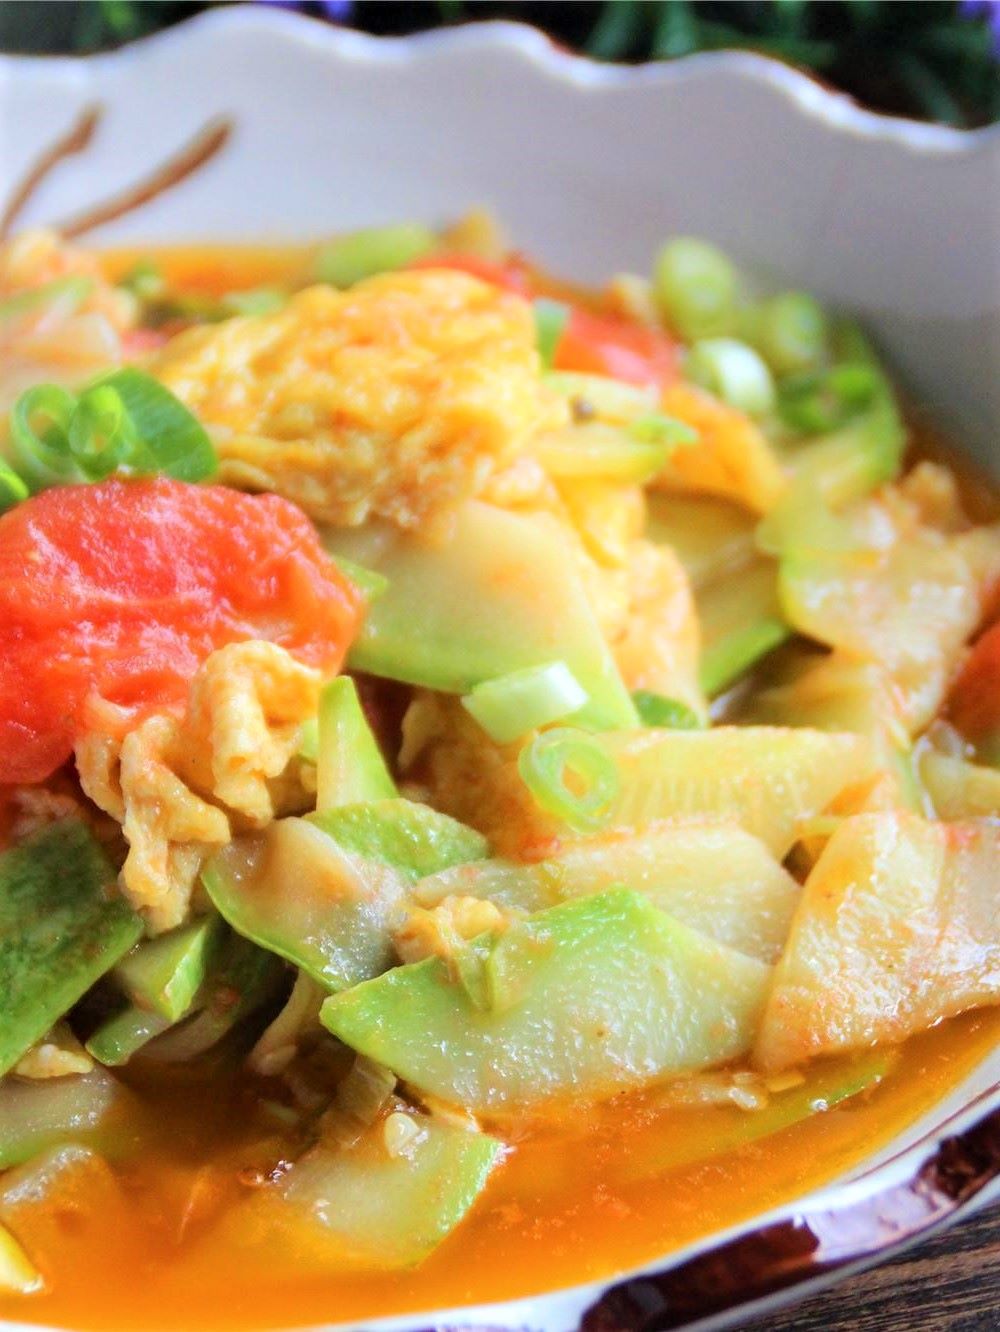 Scrambled eggs with Zucchini and tomatoes recipe china home-cooked dish 2020